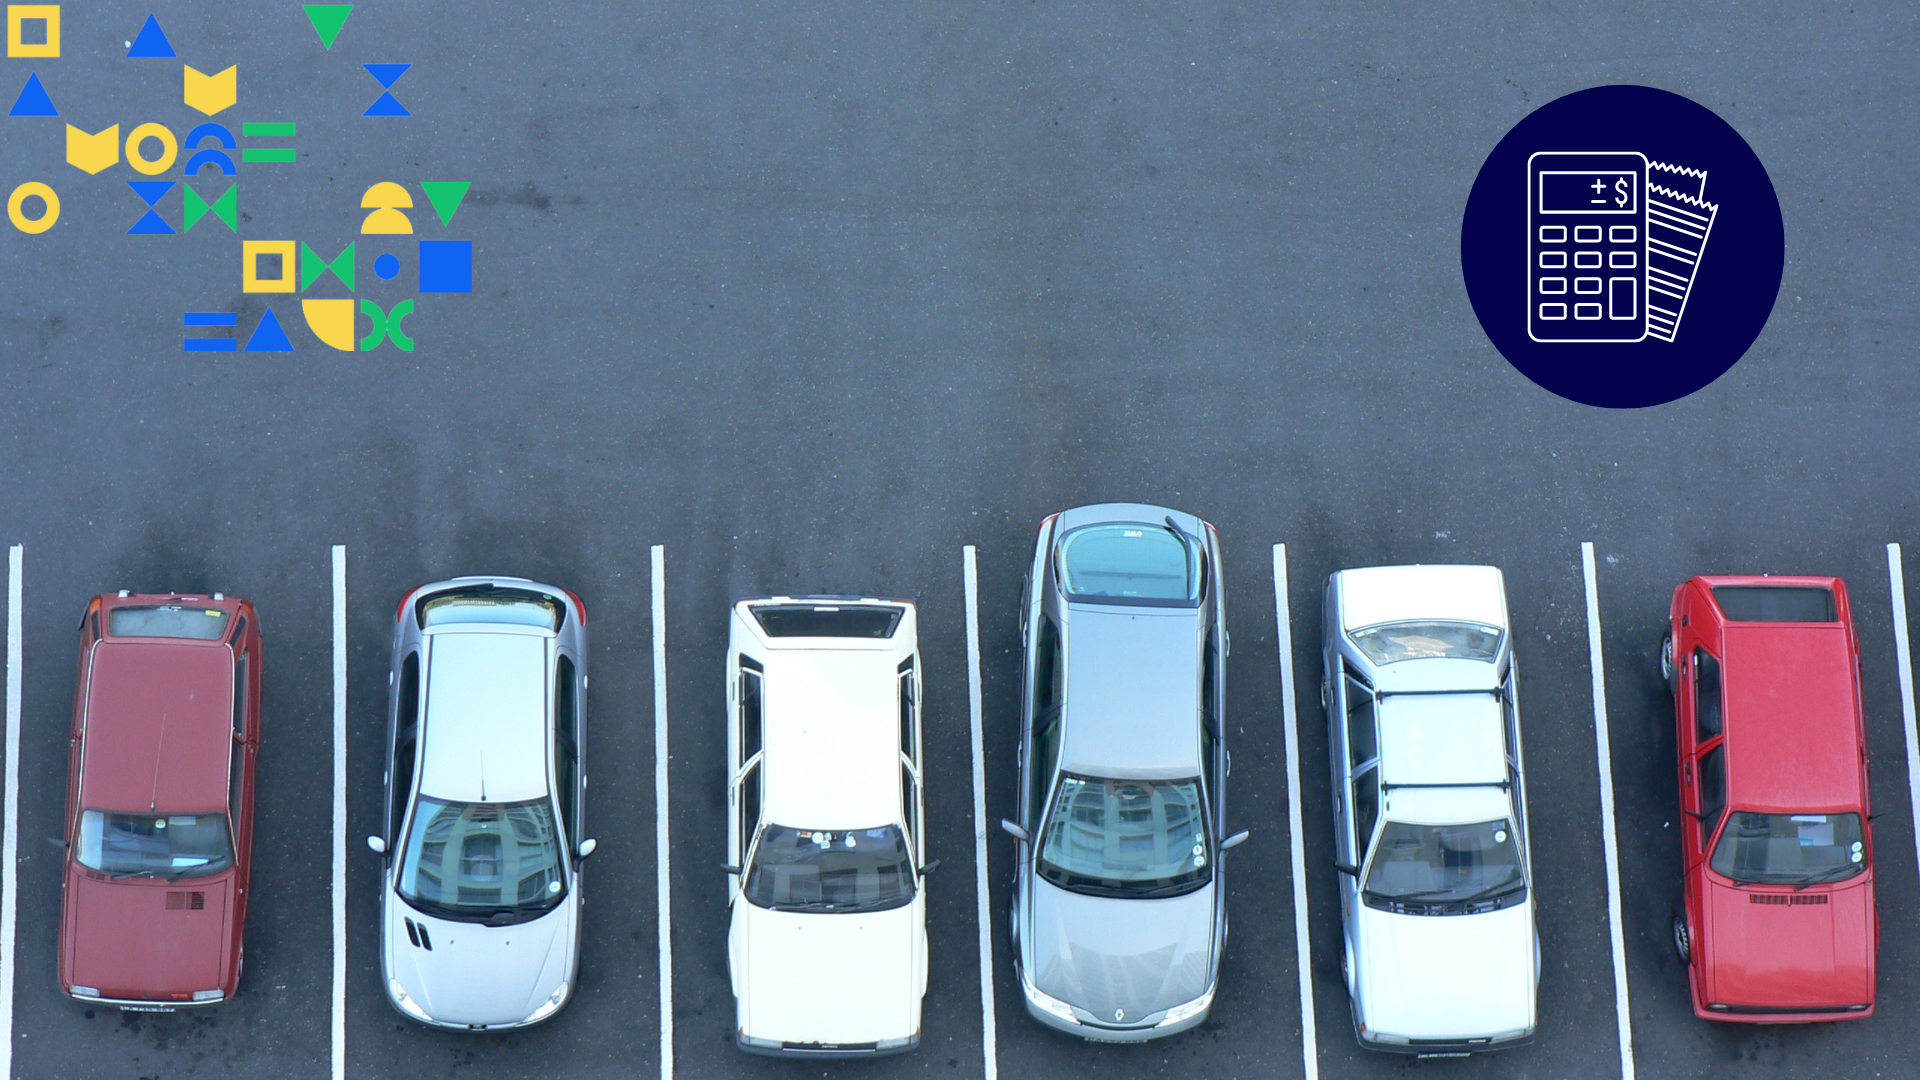 Image of six cars in a row in a parking lot with an icon of a calculator and receipts to represent car insurance.